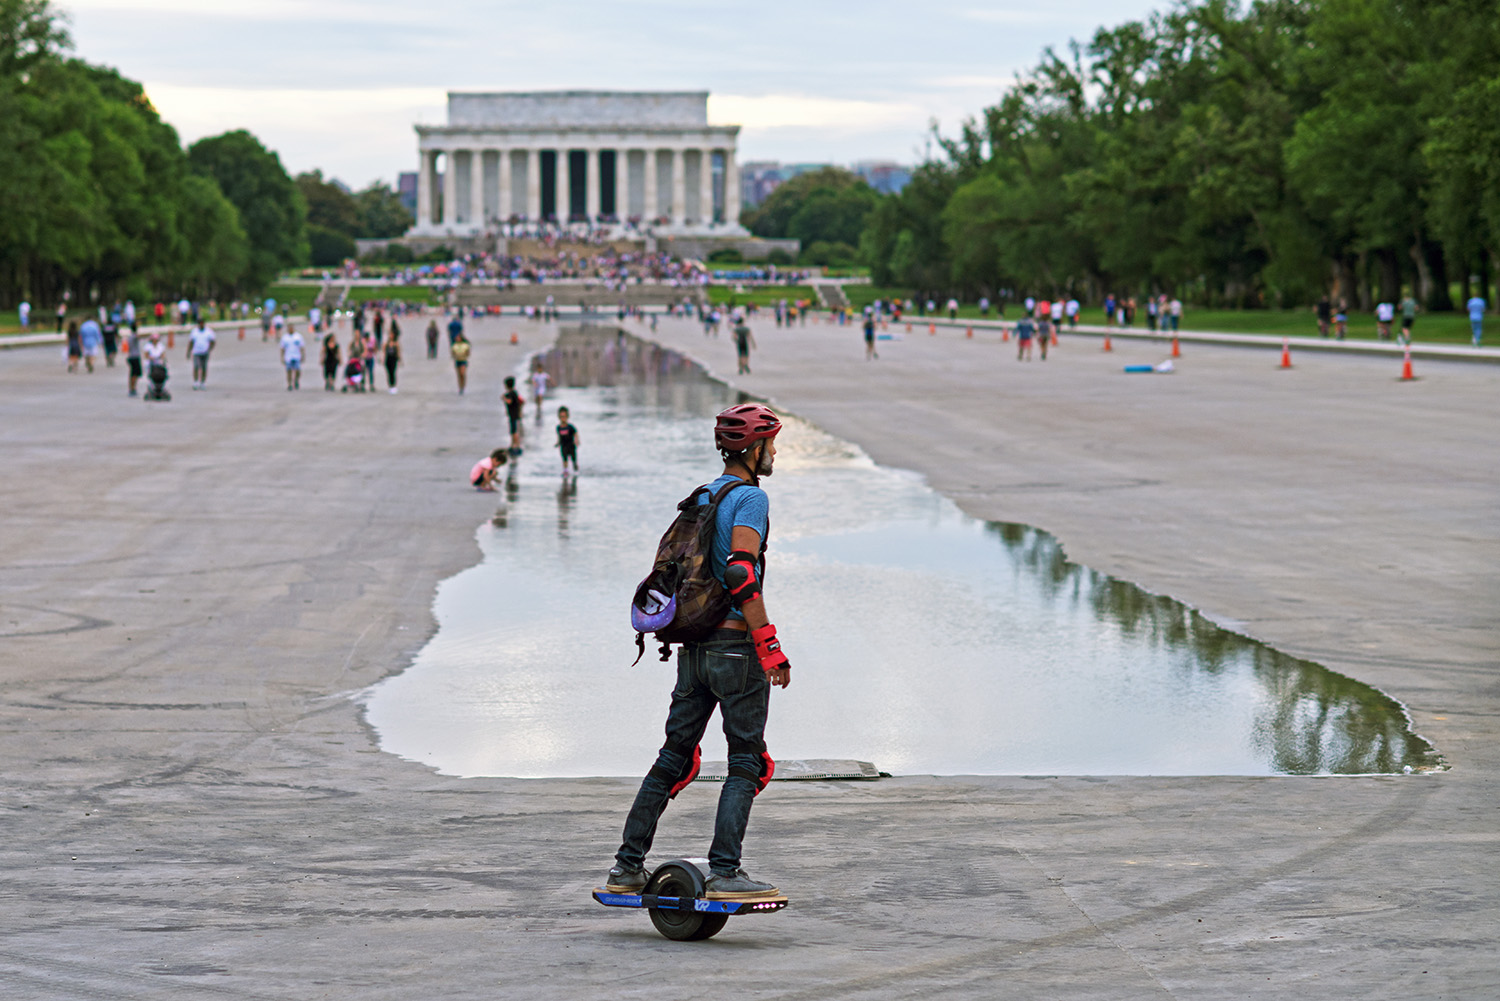 Lincoln_Memorial_Reflecting_Pool_Drained_Tourism_Sightseeing_Hoverboard_Onewheel_Washington_DC.jpg